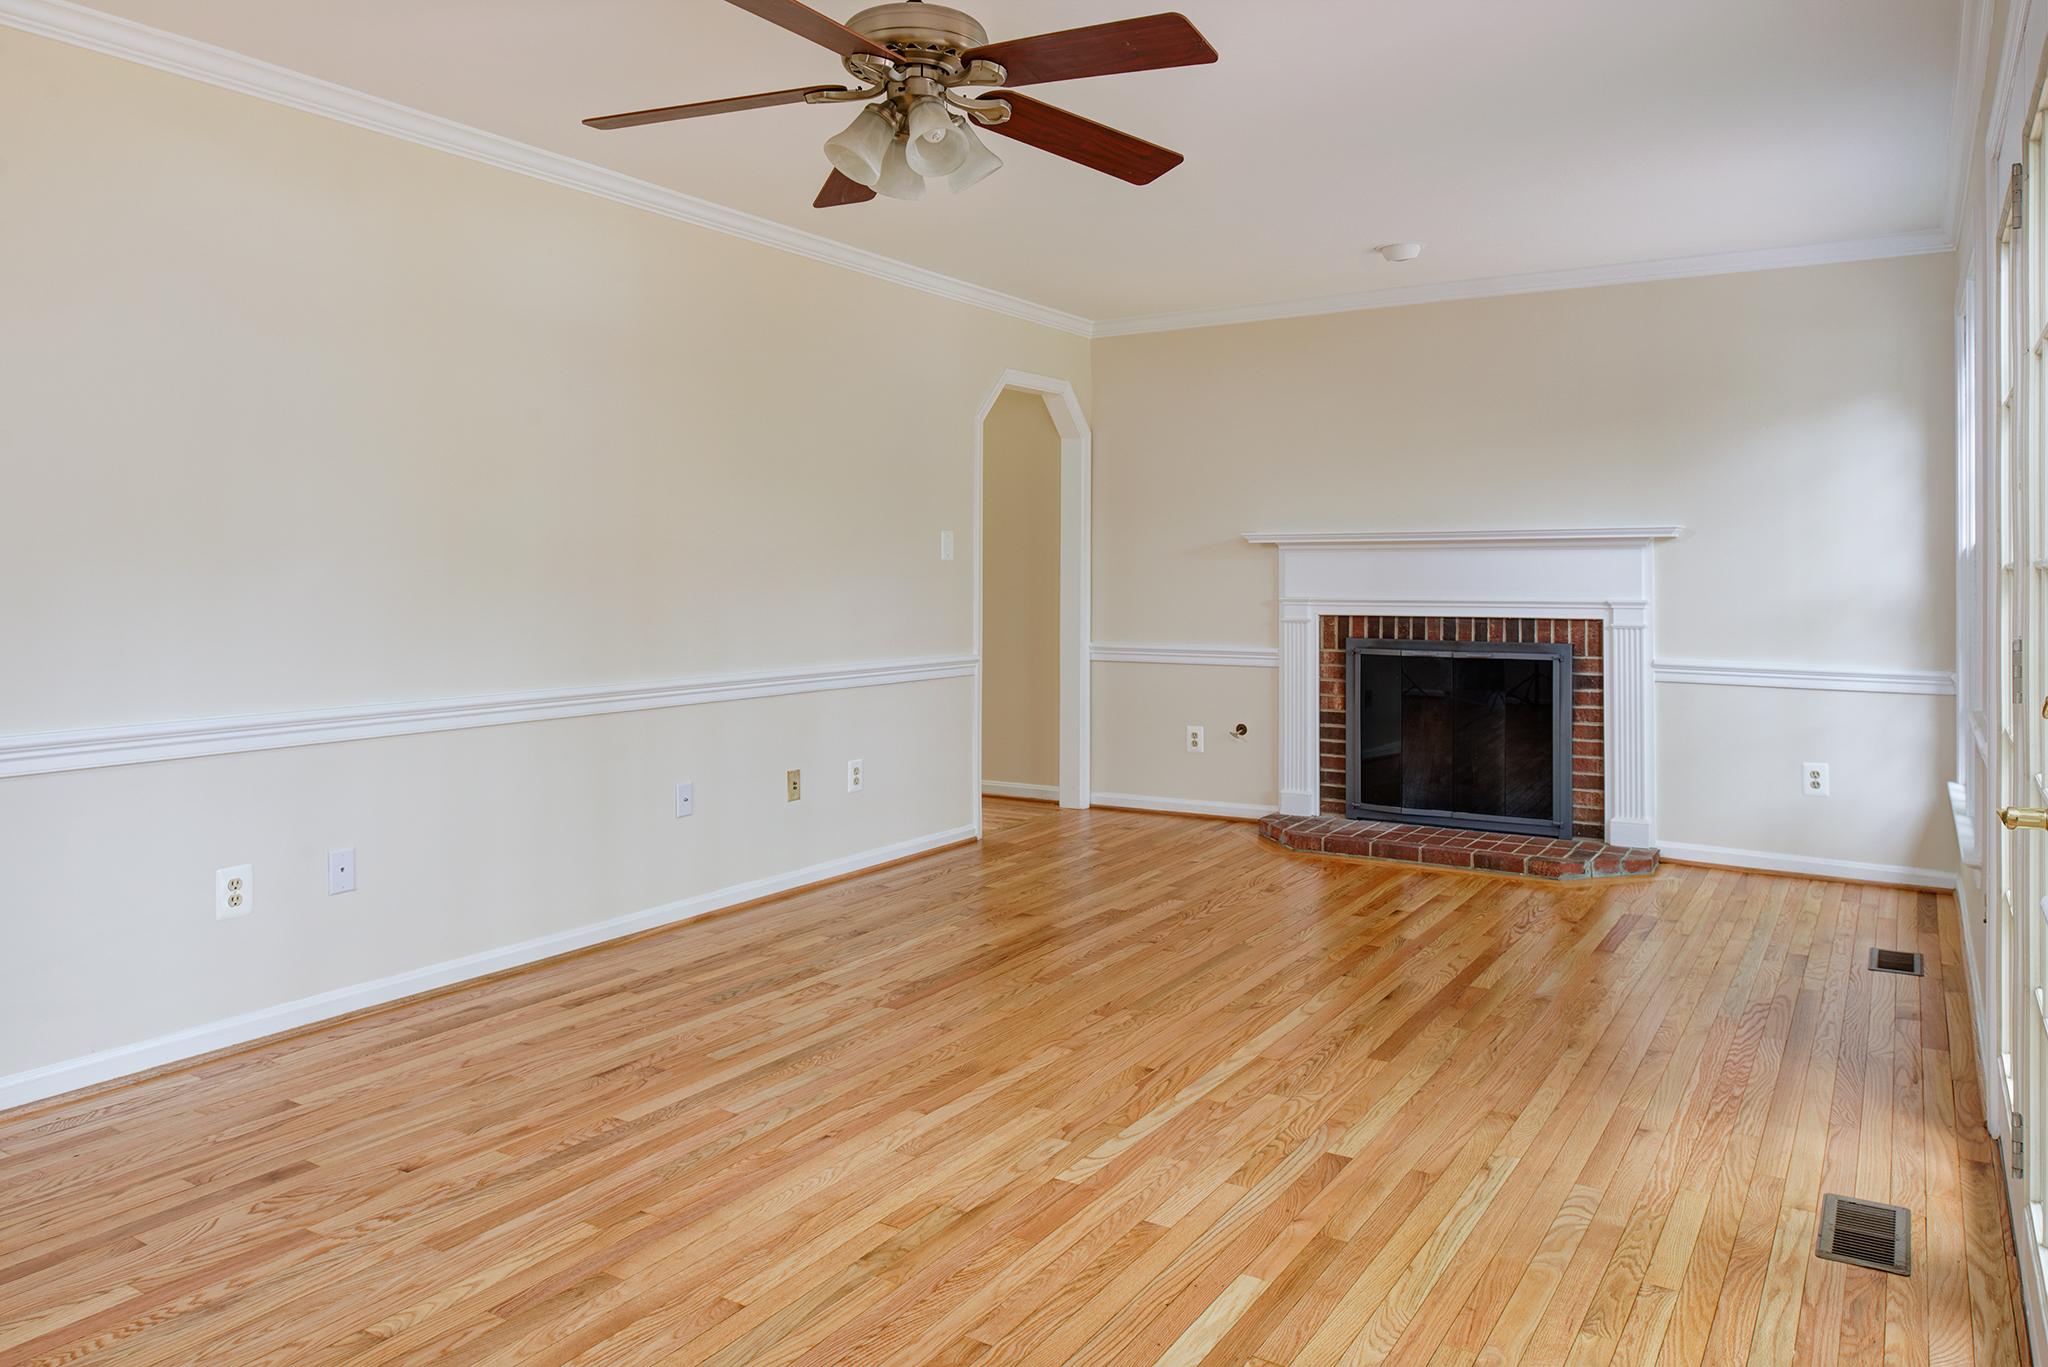 This is the wonderfully spacious living room of 1635 Stowe Rd. before we placed any furniture. Potential buyers were struggling with how to use the space.